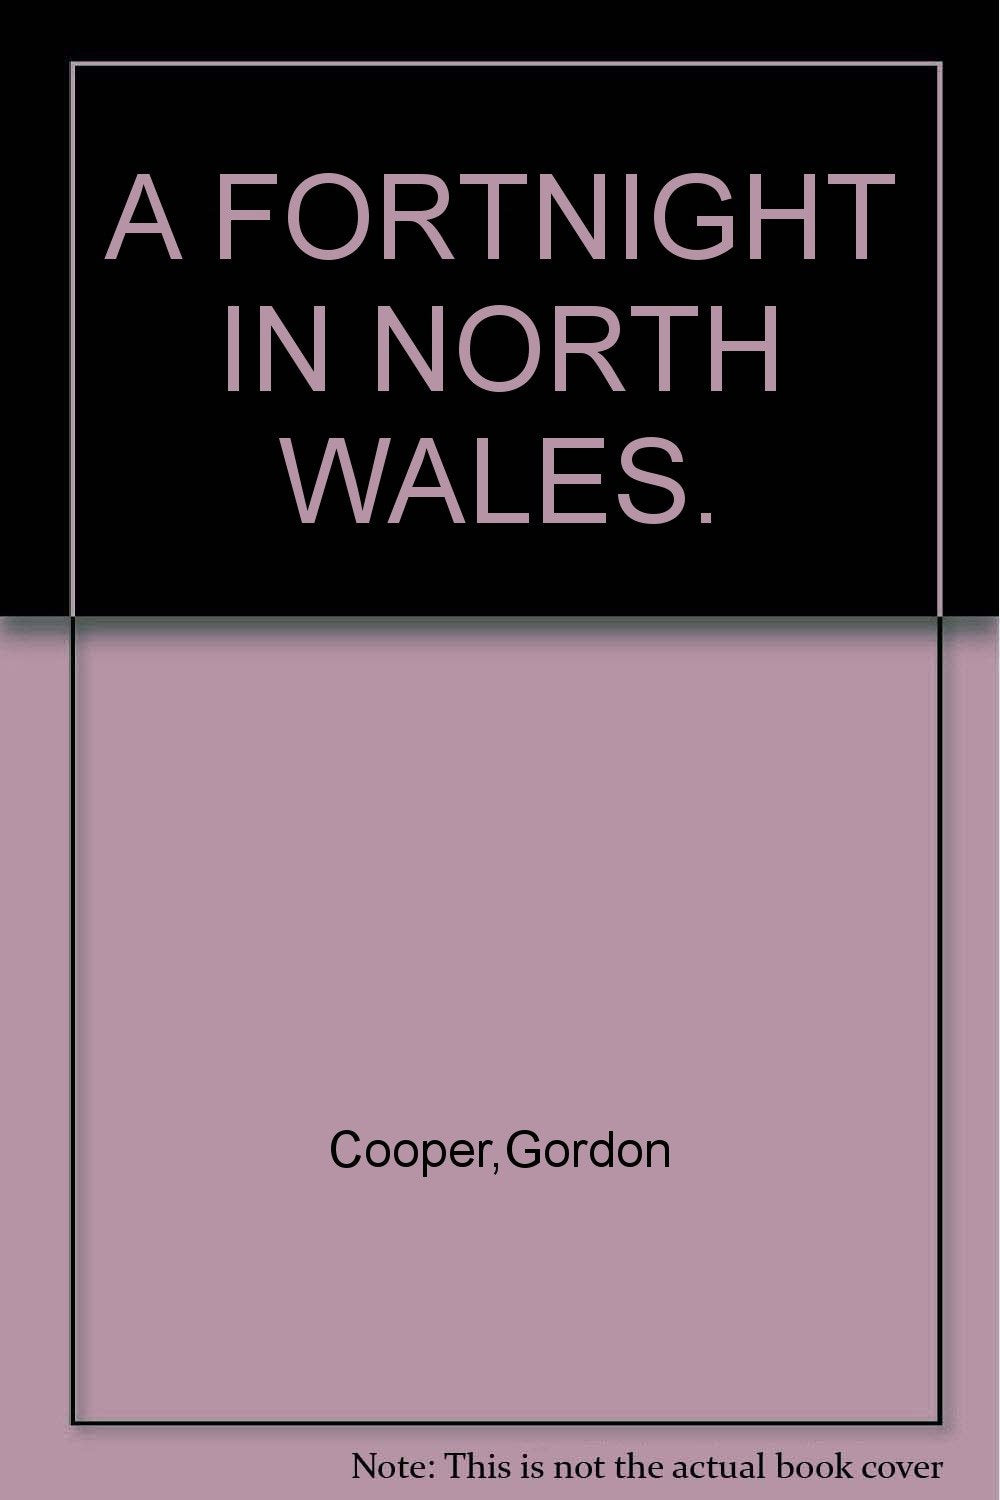 A FORTNIGHT IN NORTH WALES. [Hardcover] Cooper,Gordon